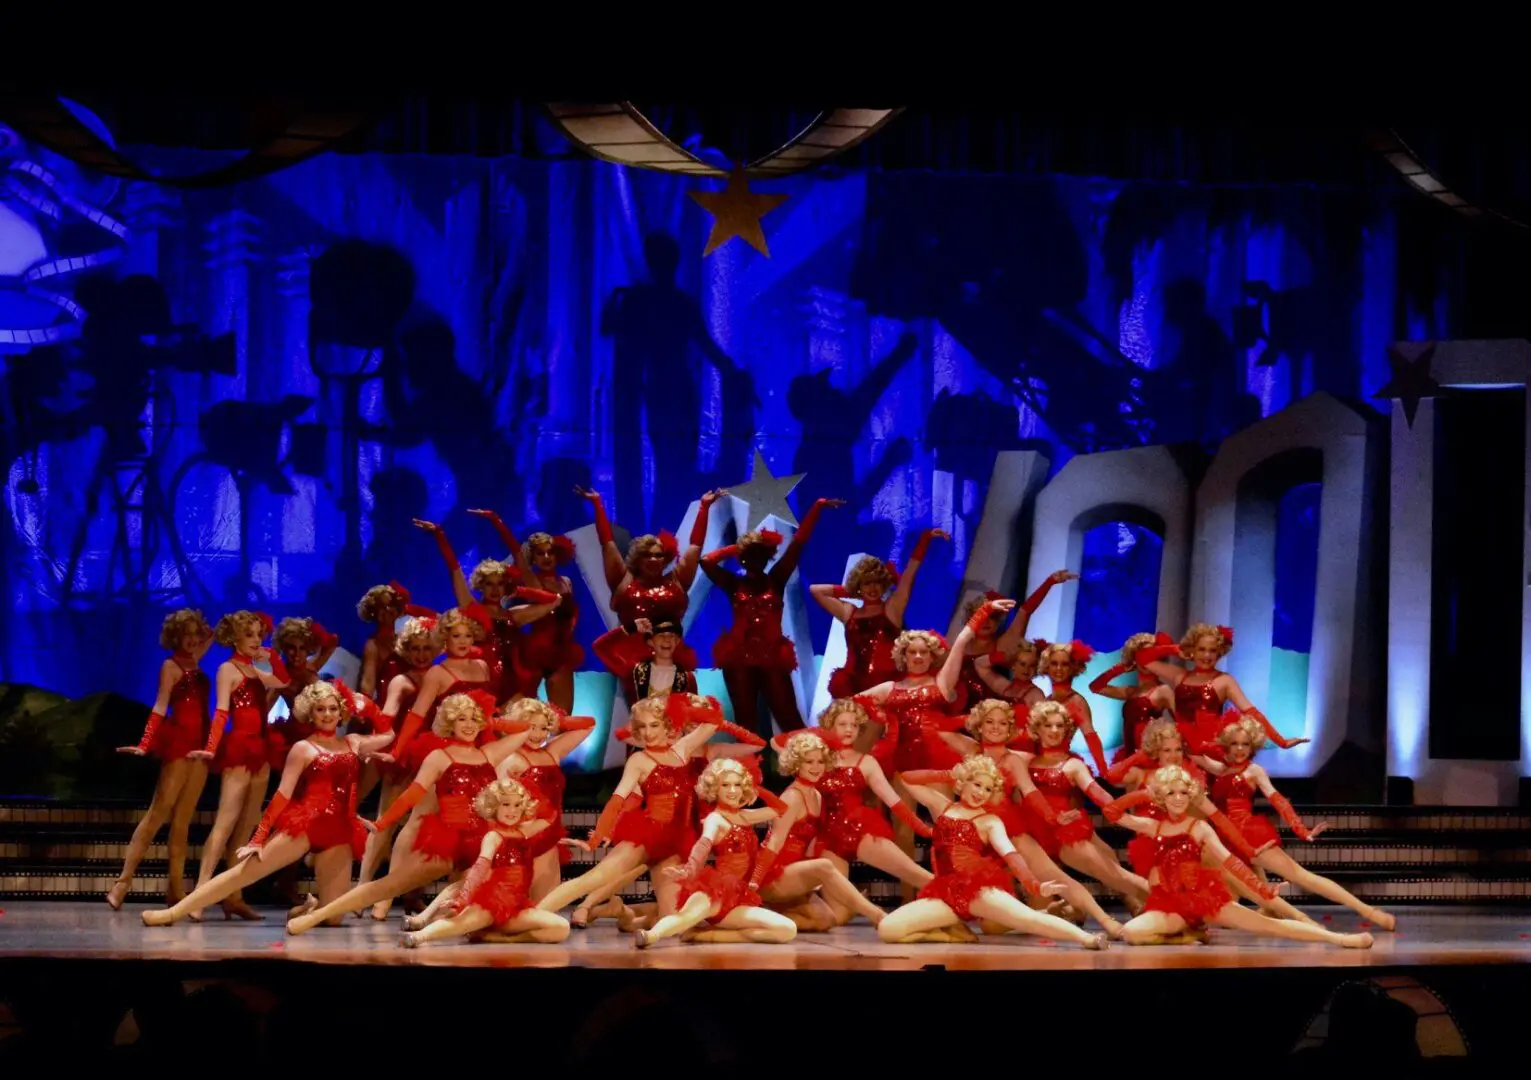 A group of people in red outfits on stage.